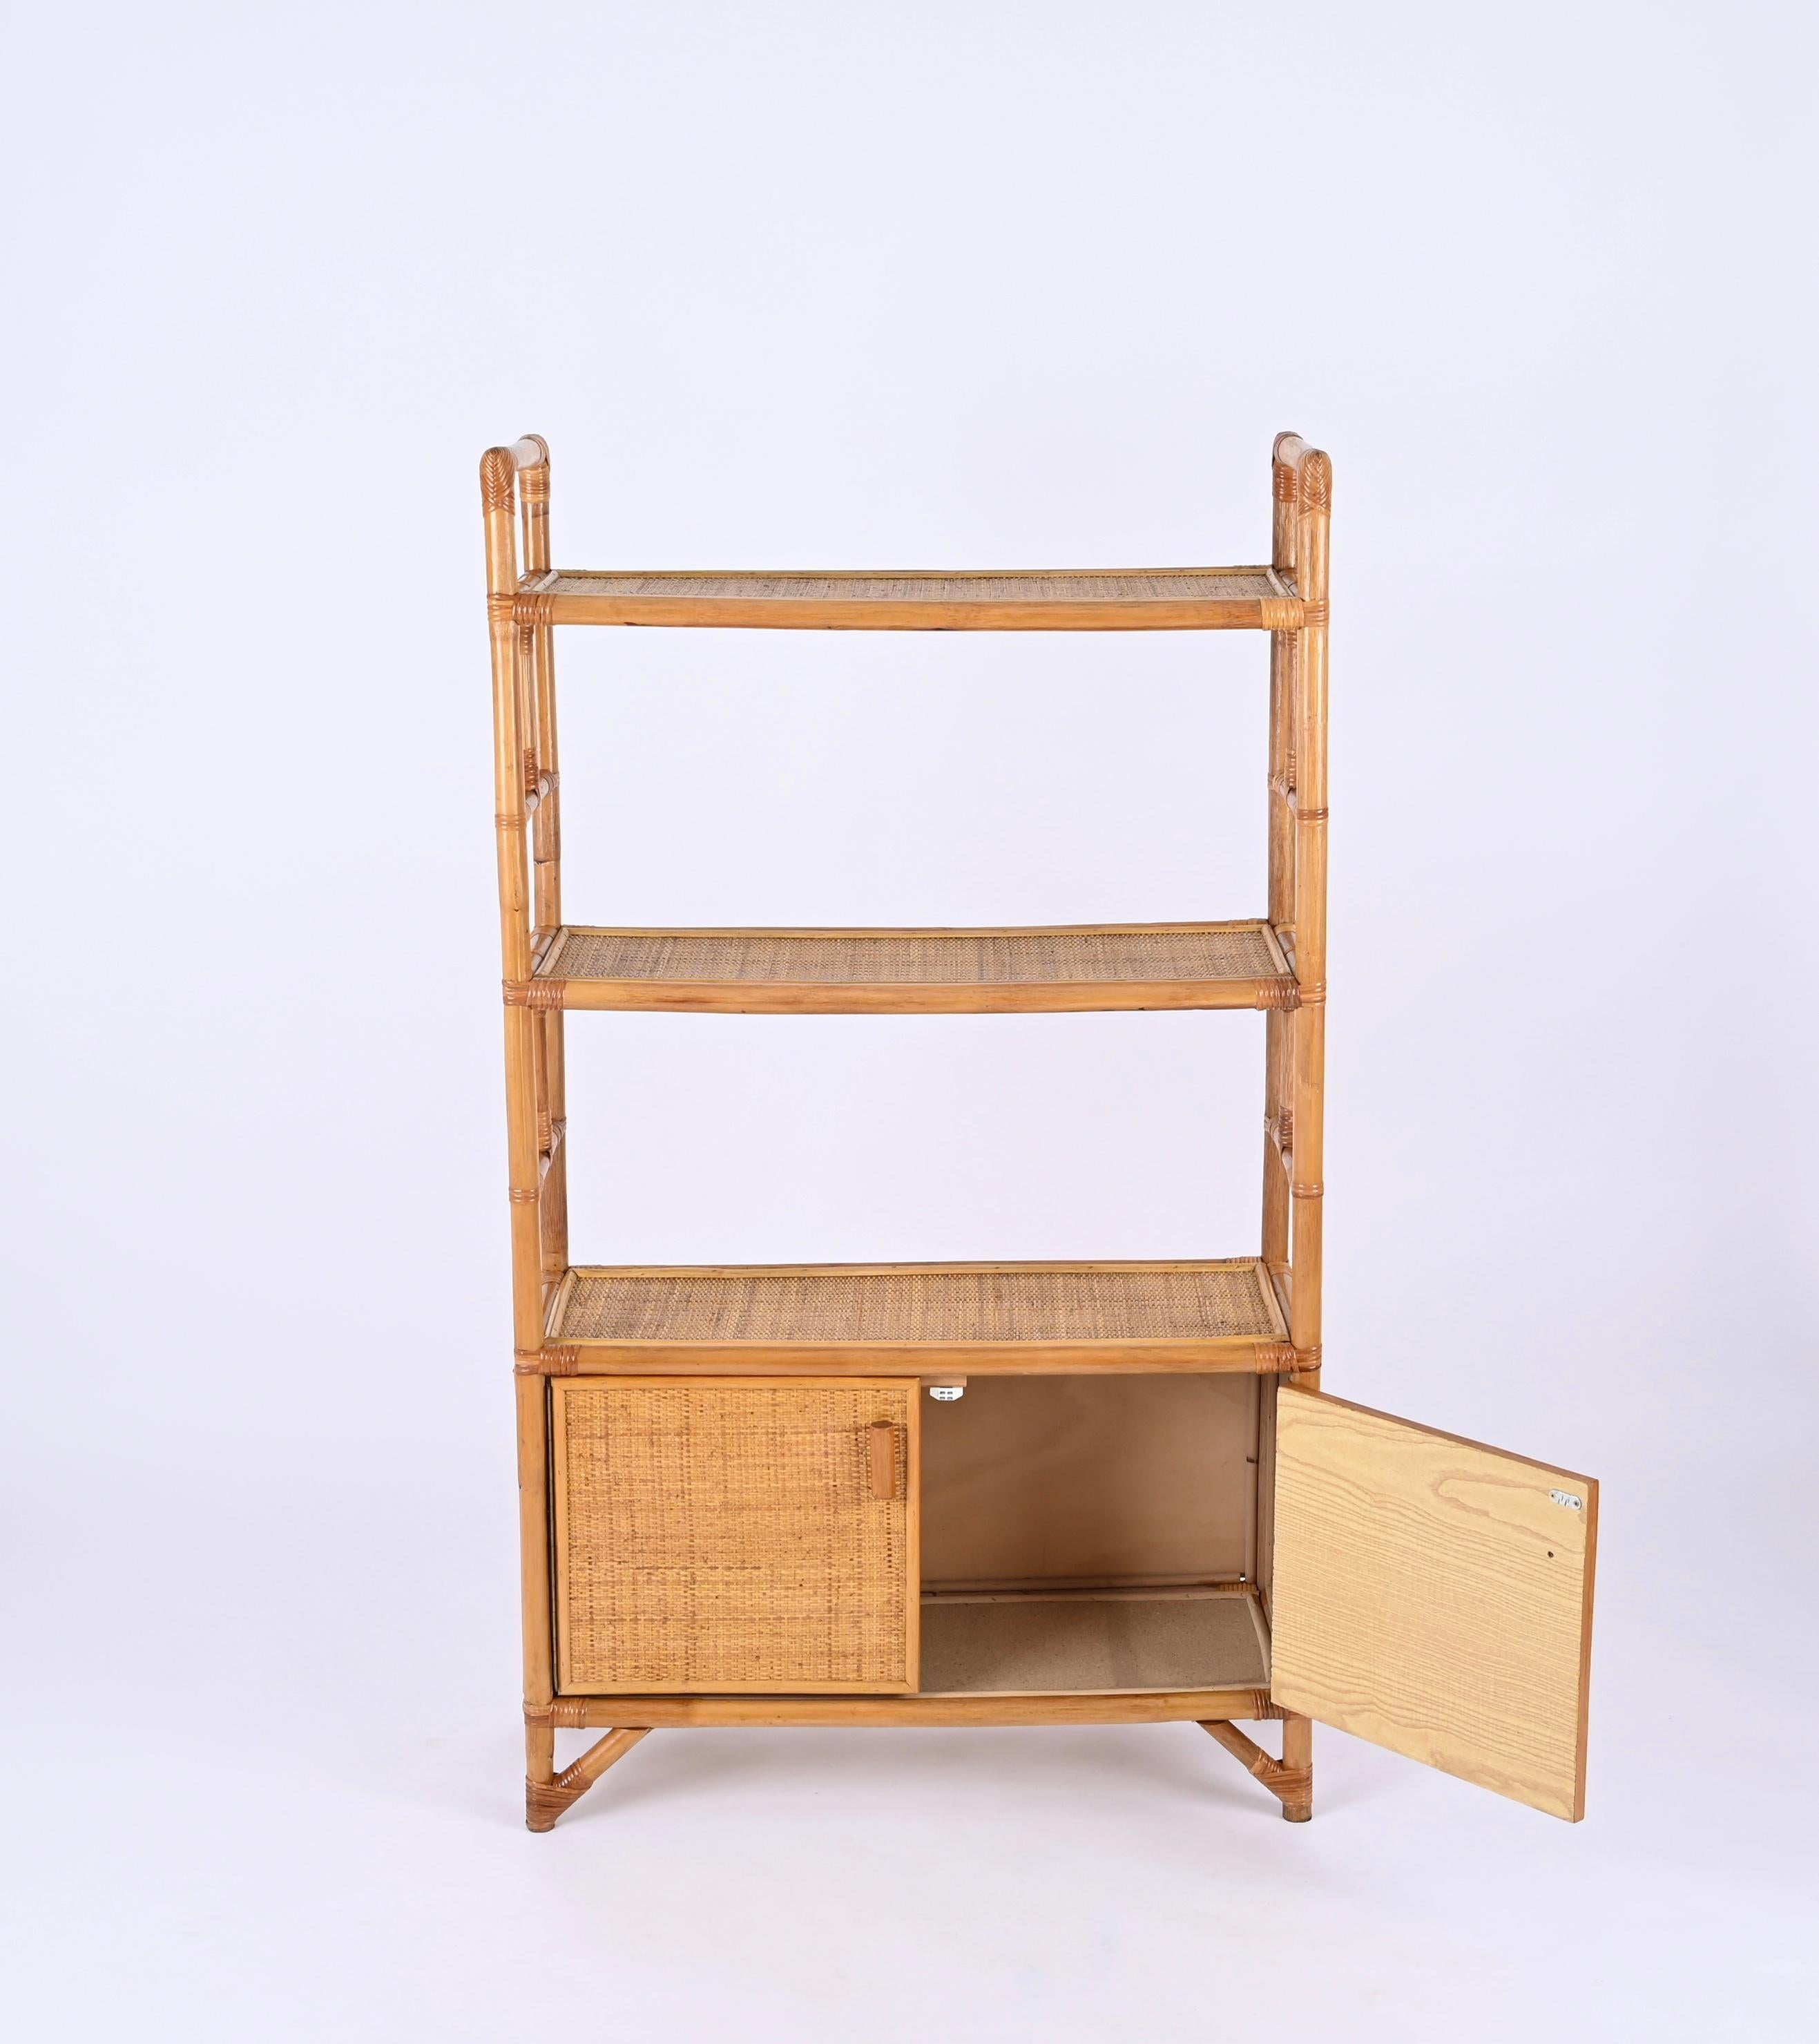 Midcentury Italian Modern Rattan and Bamboo Bookcase with Doors, 1970s For Sale 4